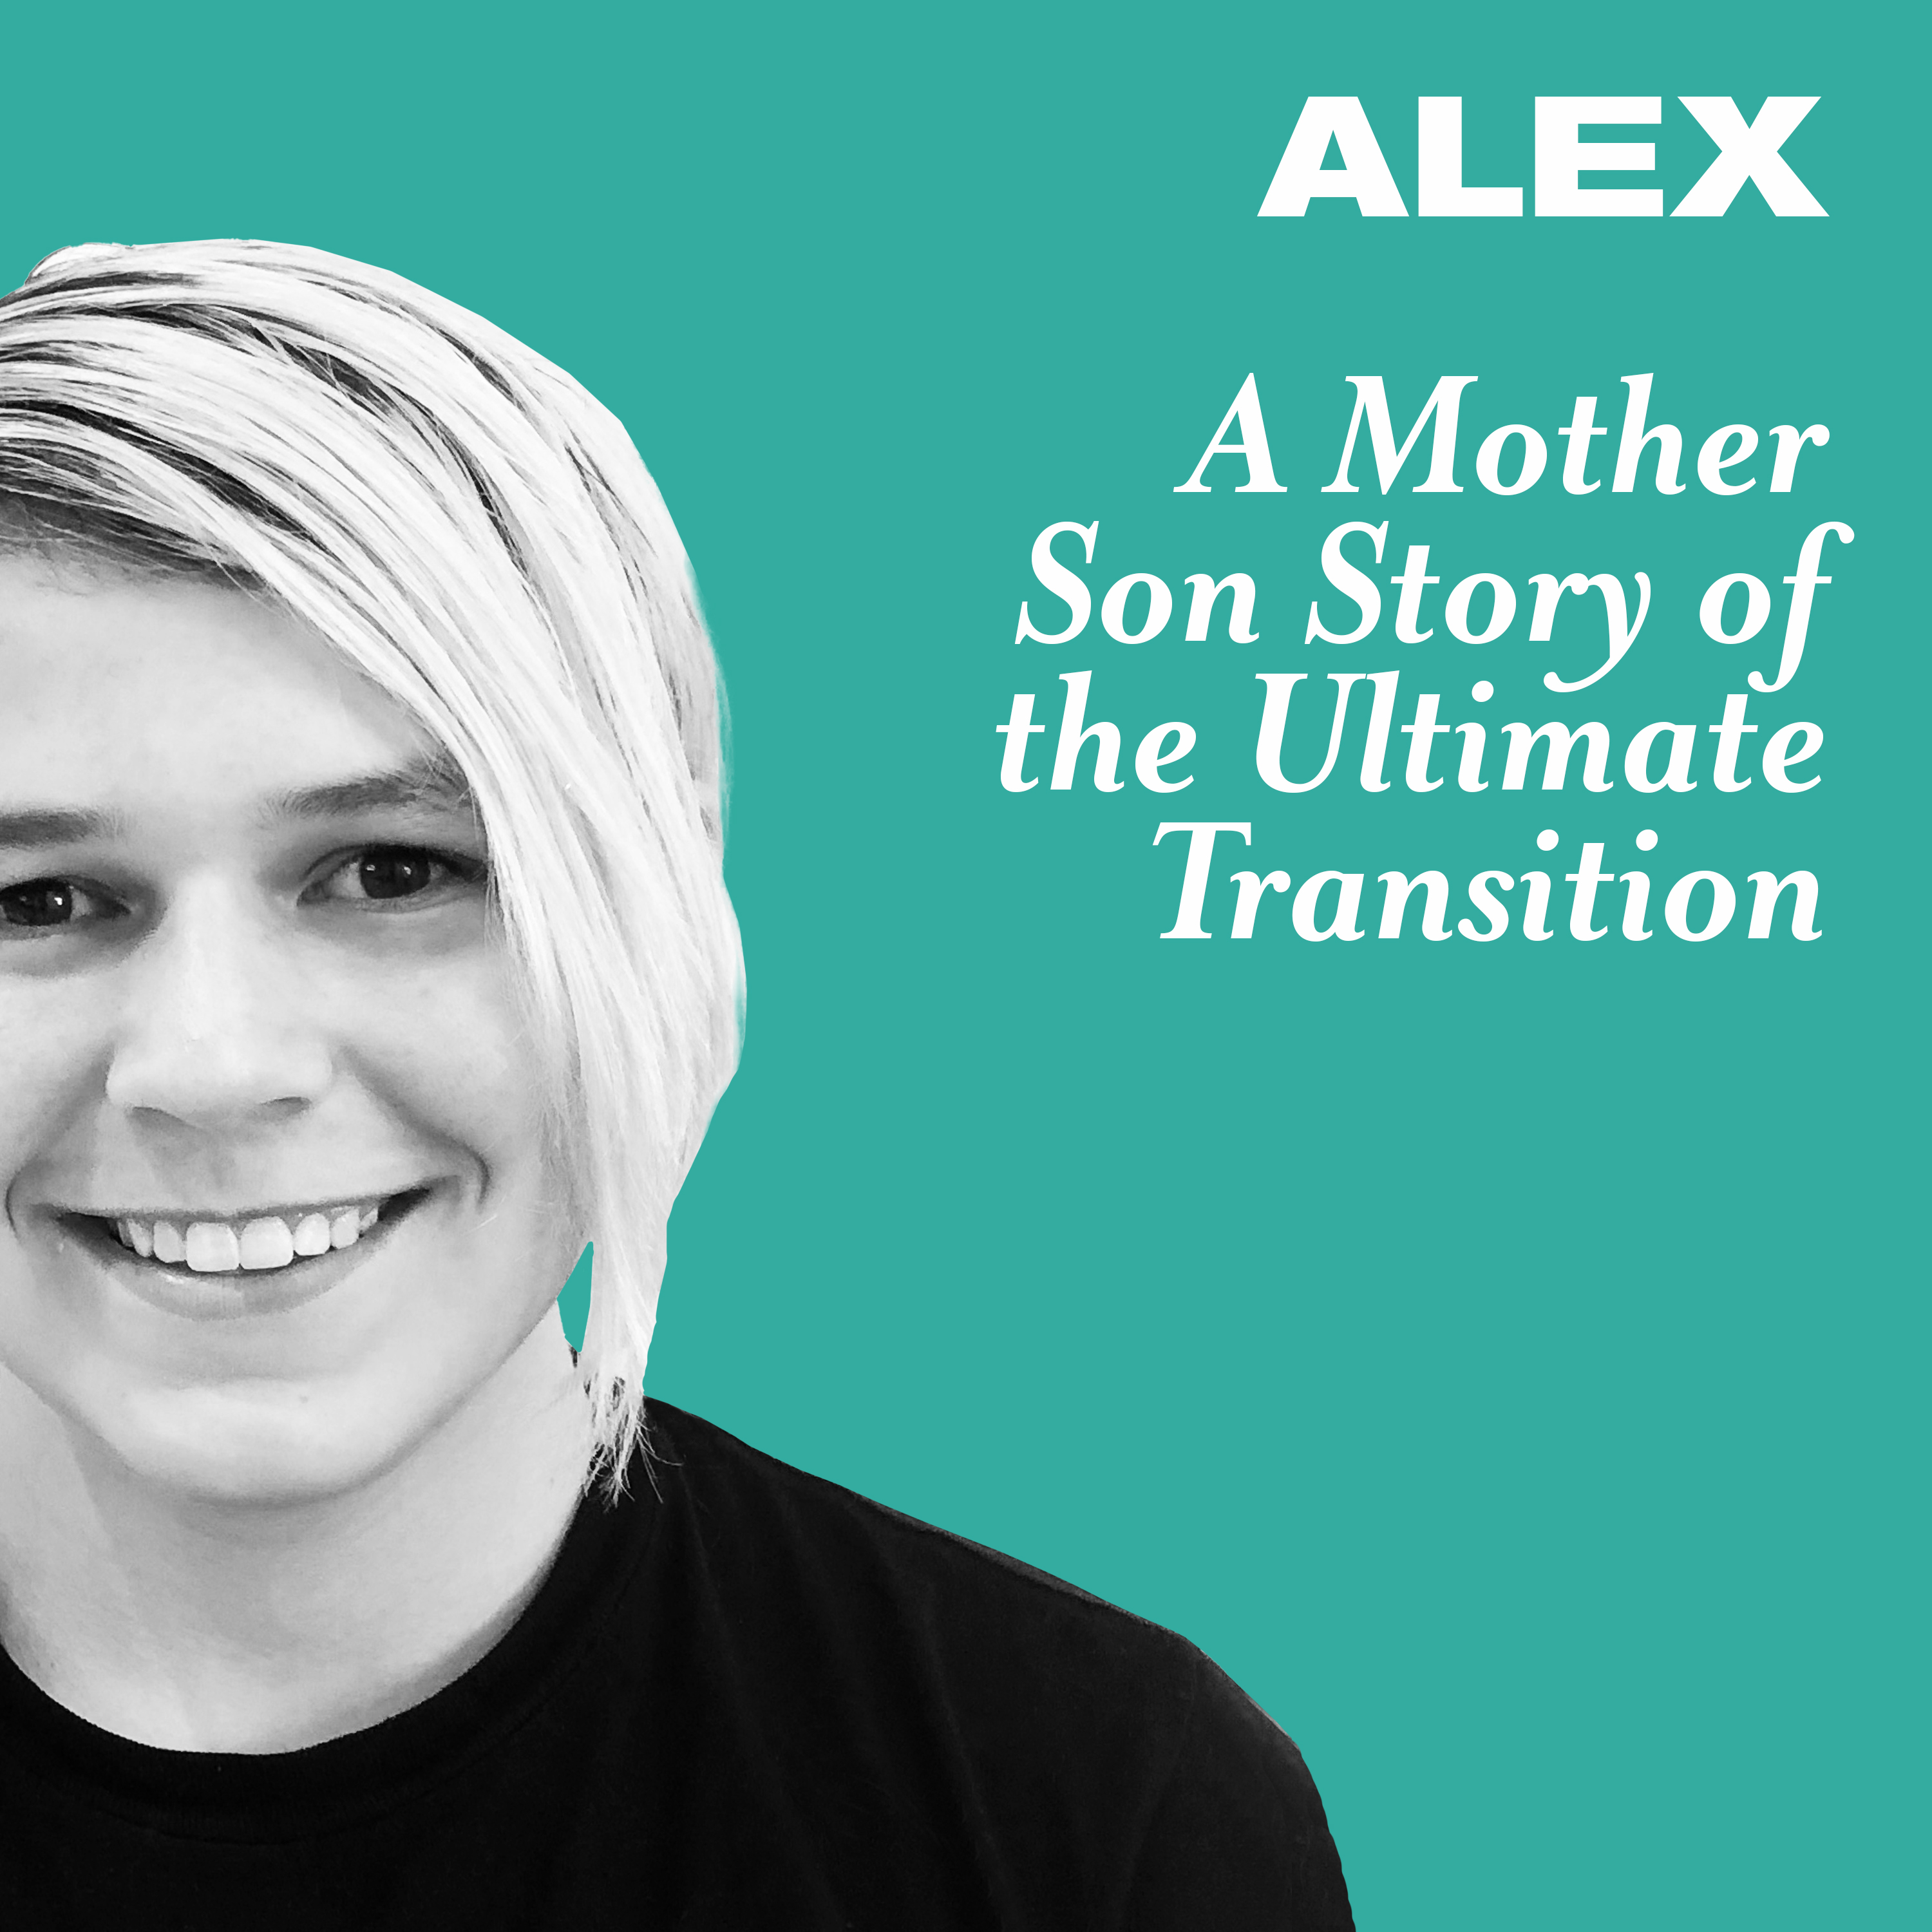 A Mother and Son Story of the Ultimate Transition